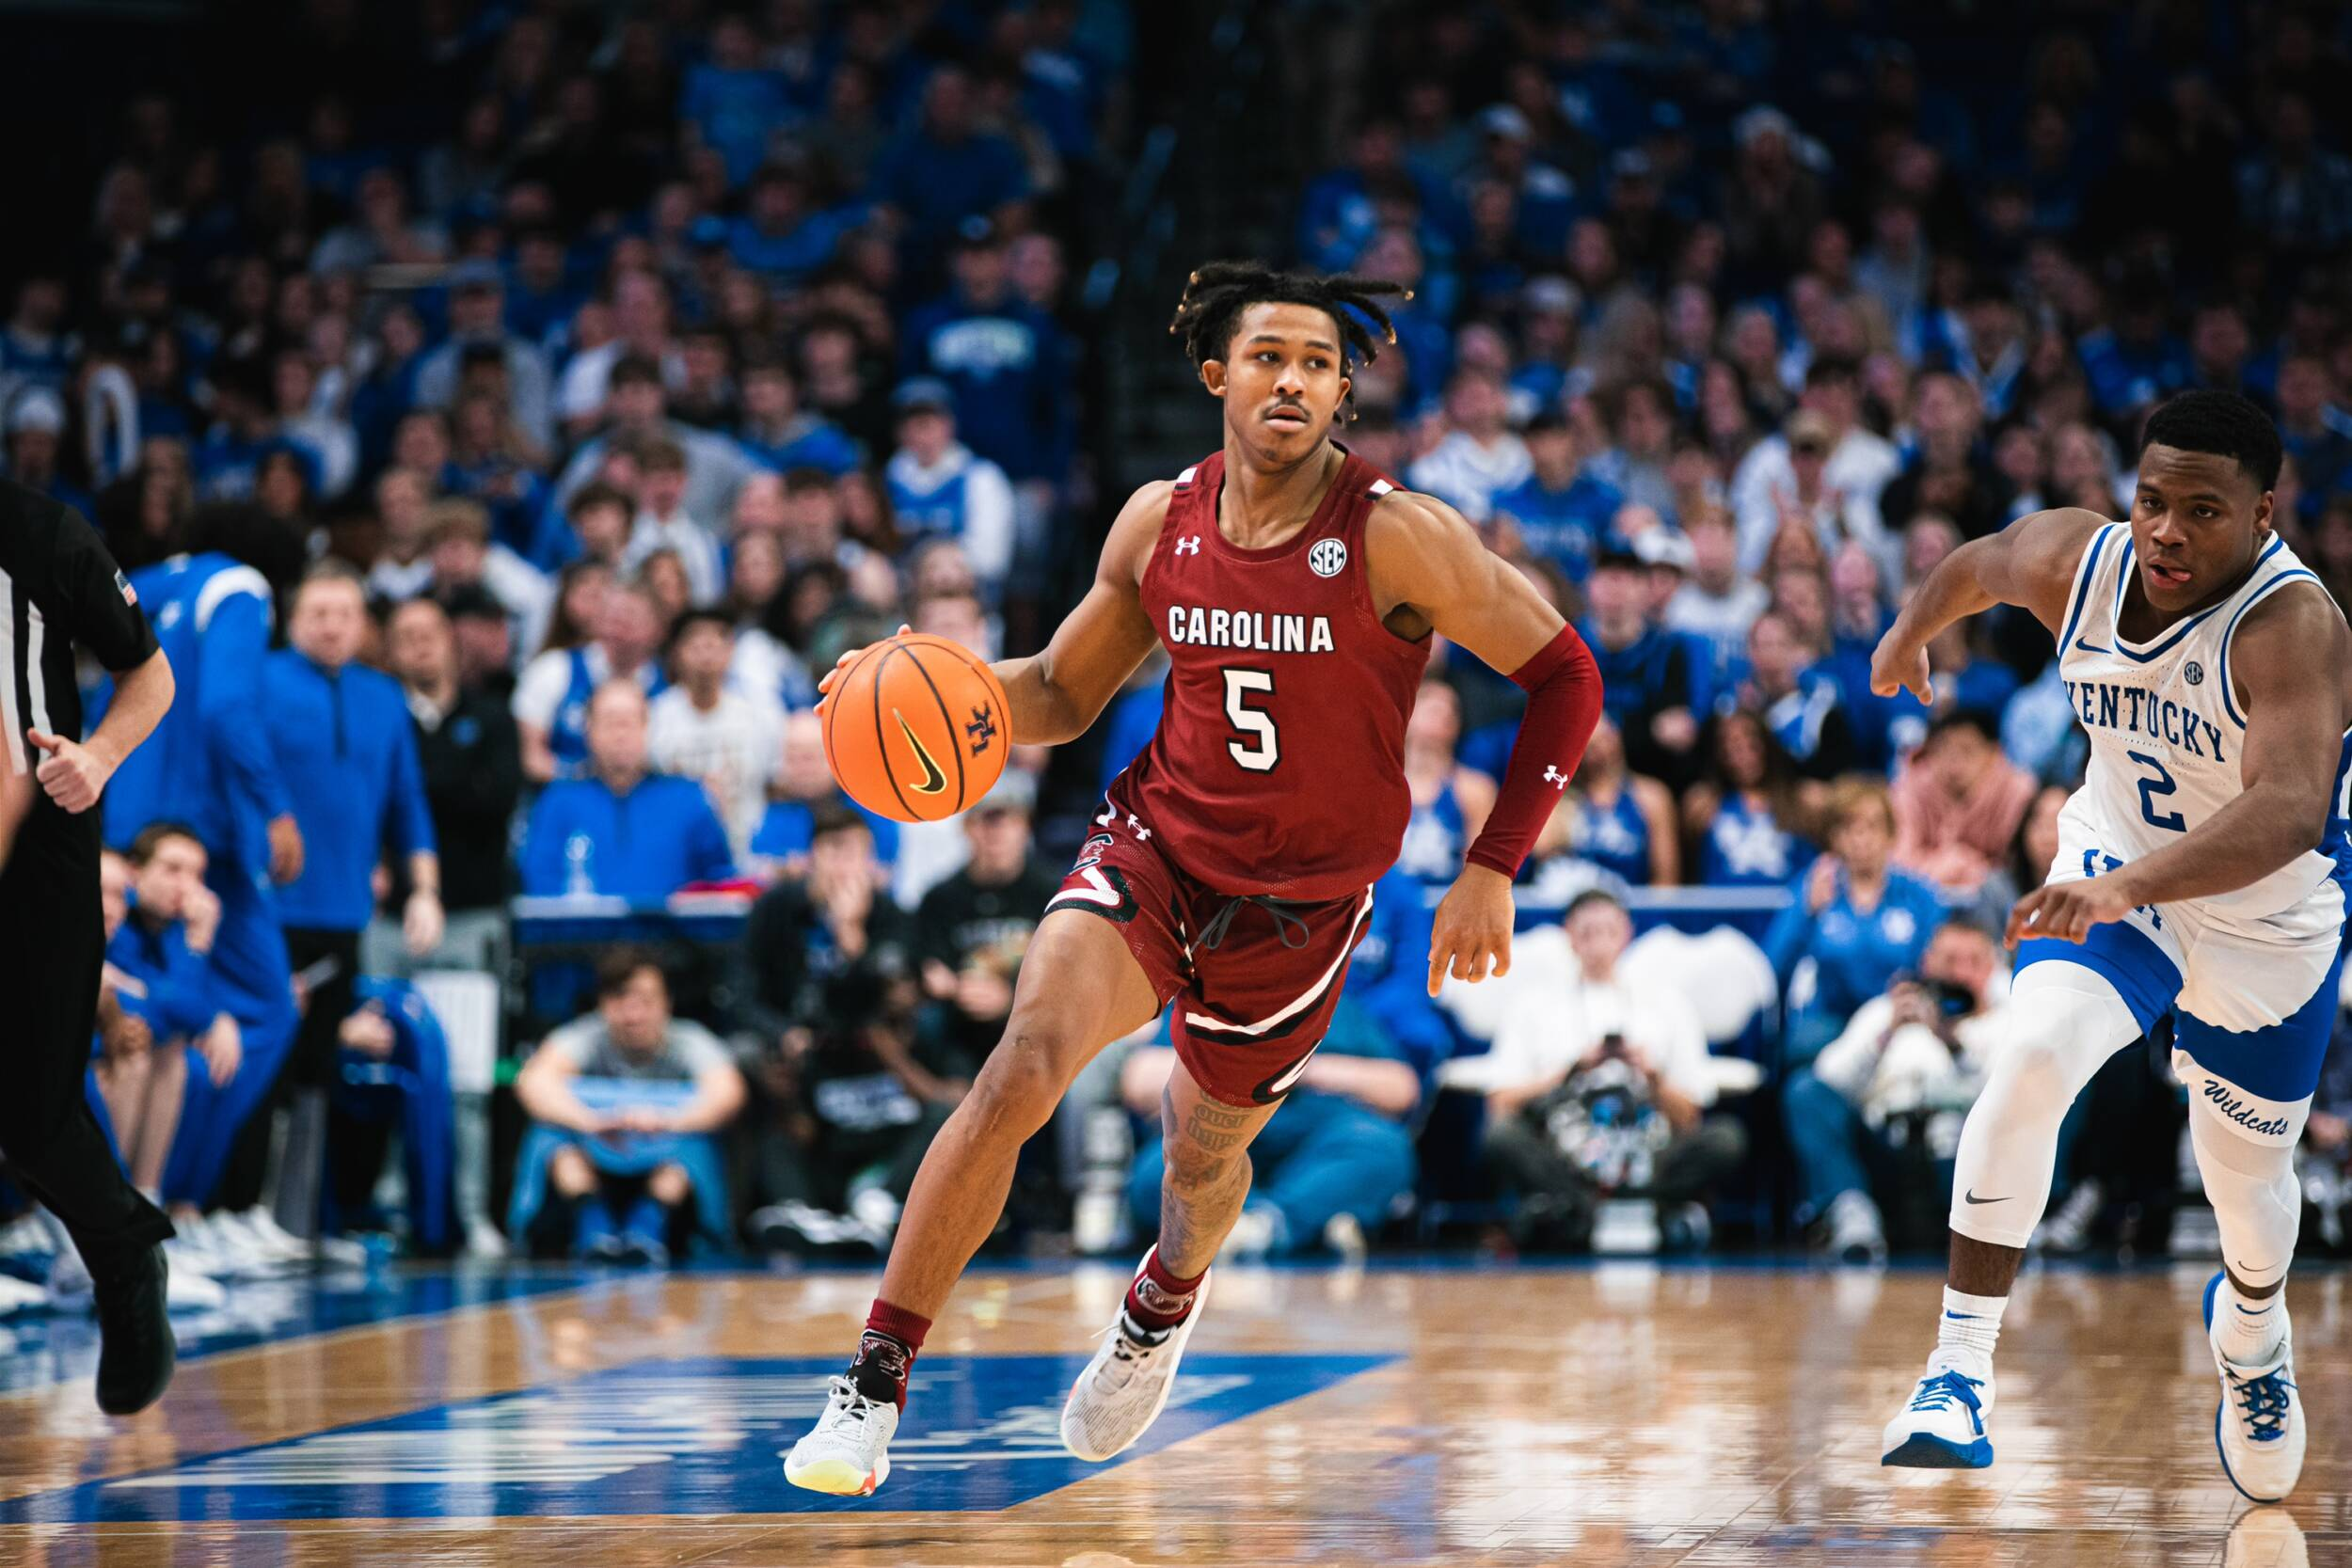 Johnson Leads Gamecocks to First Win at Rupp Since 2009